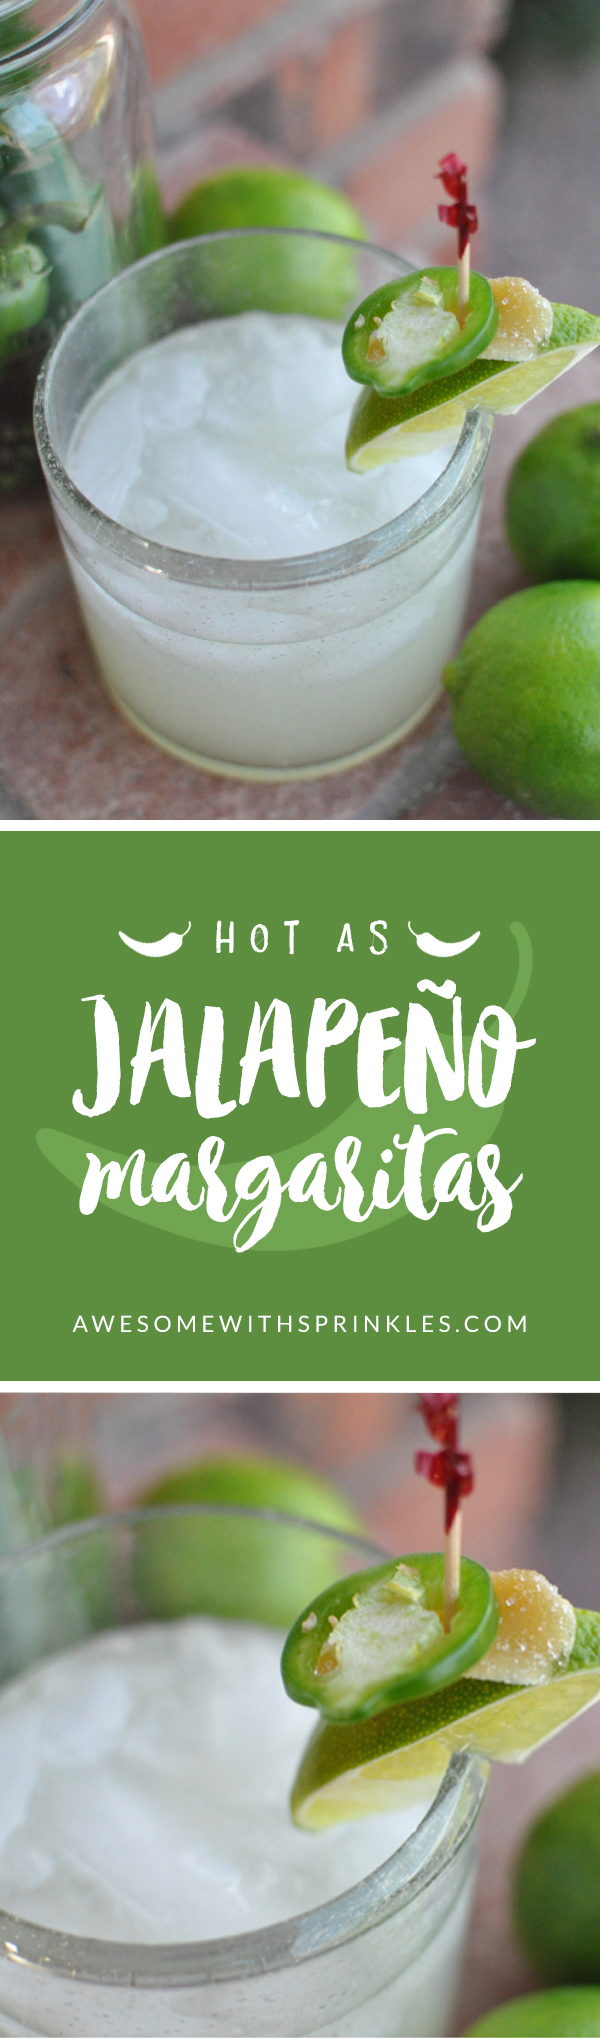 This perfect and perfectly simple margarita recipe is the only one you'll ever need. Kick it up a notch with sweet & spicy jalapeño simple syrup. Cheers!